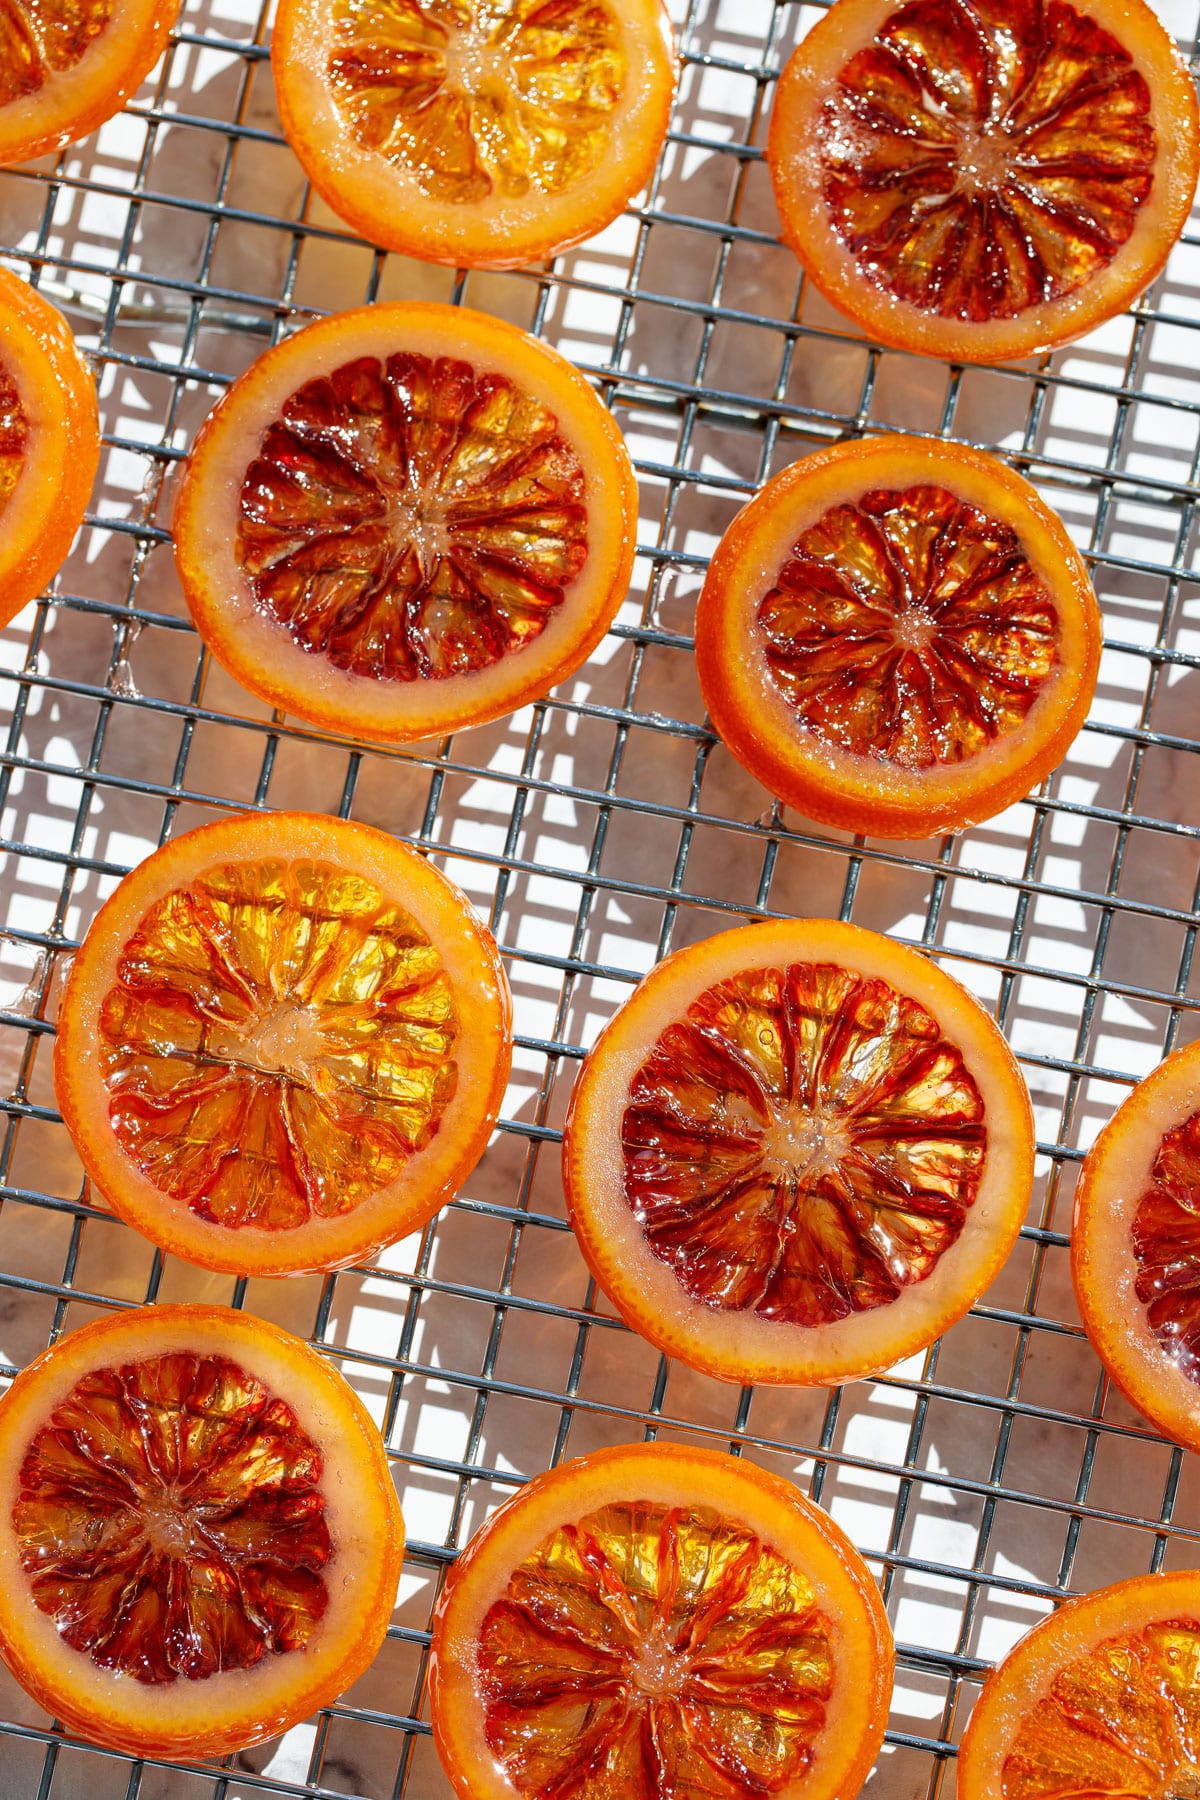 Homemade Candied Blood Orange Slices on a wire rack in bright direct light to showcase the stained-glass like appearance.